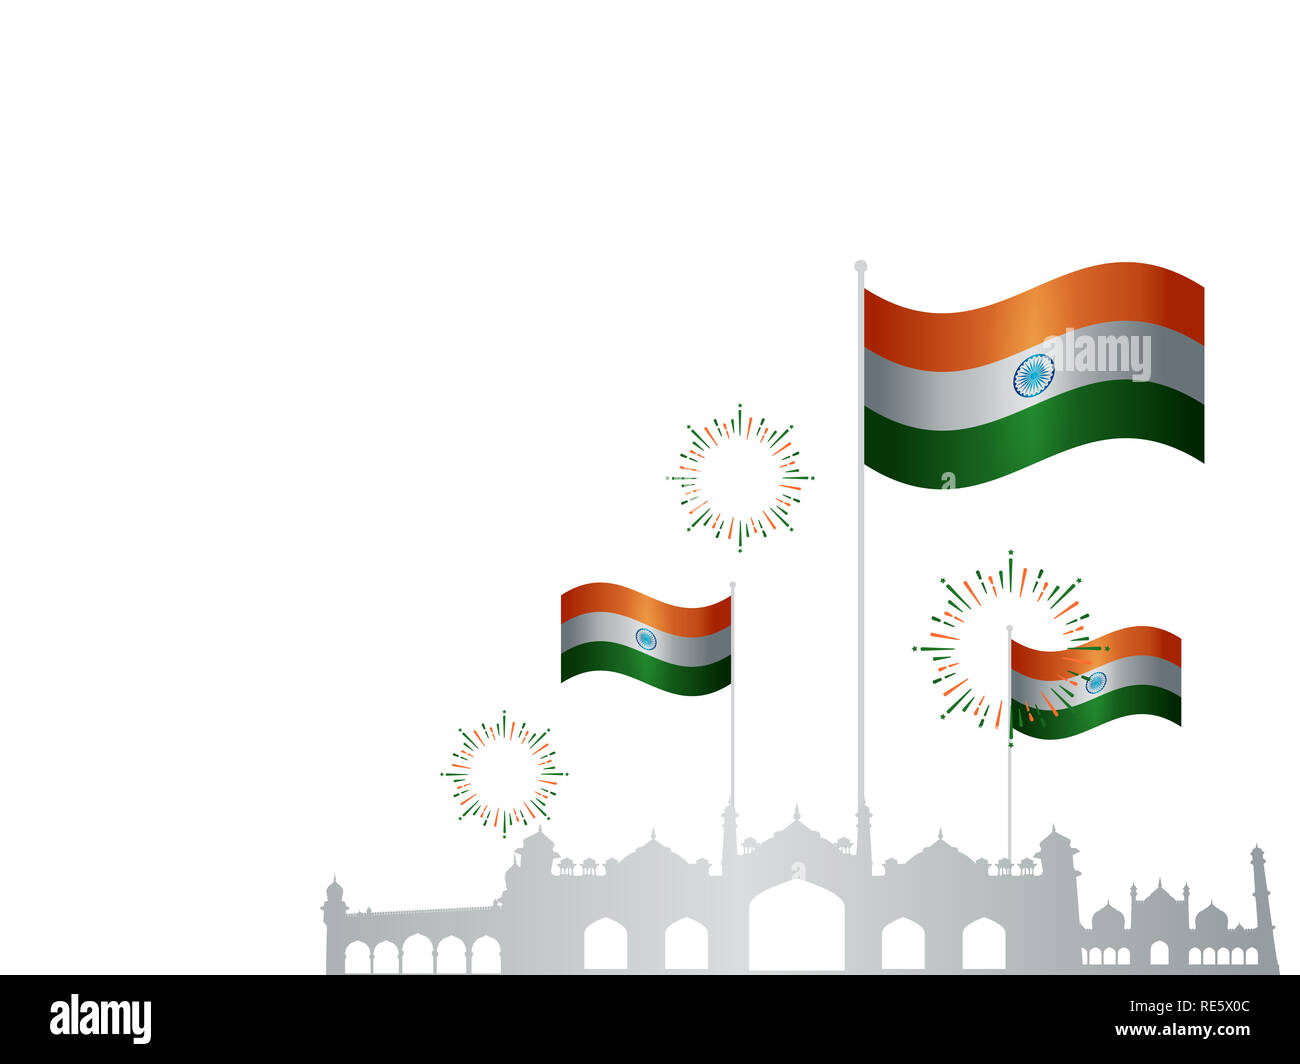 Elegant 15th august independence day banner Vector Image